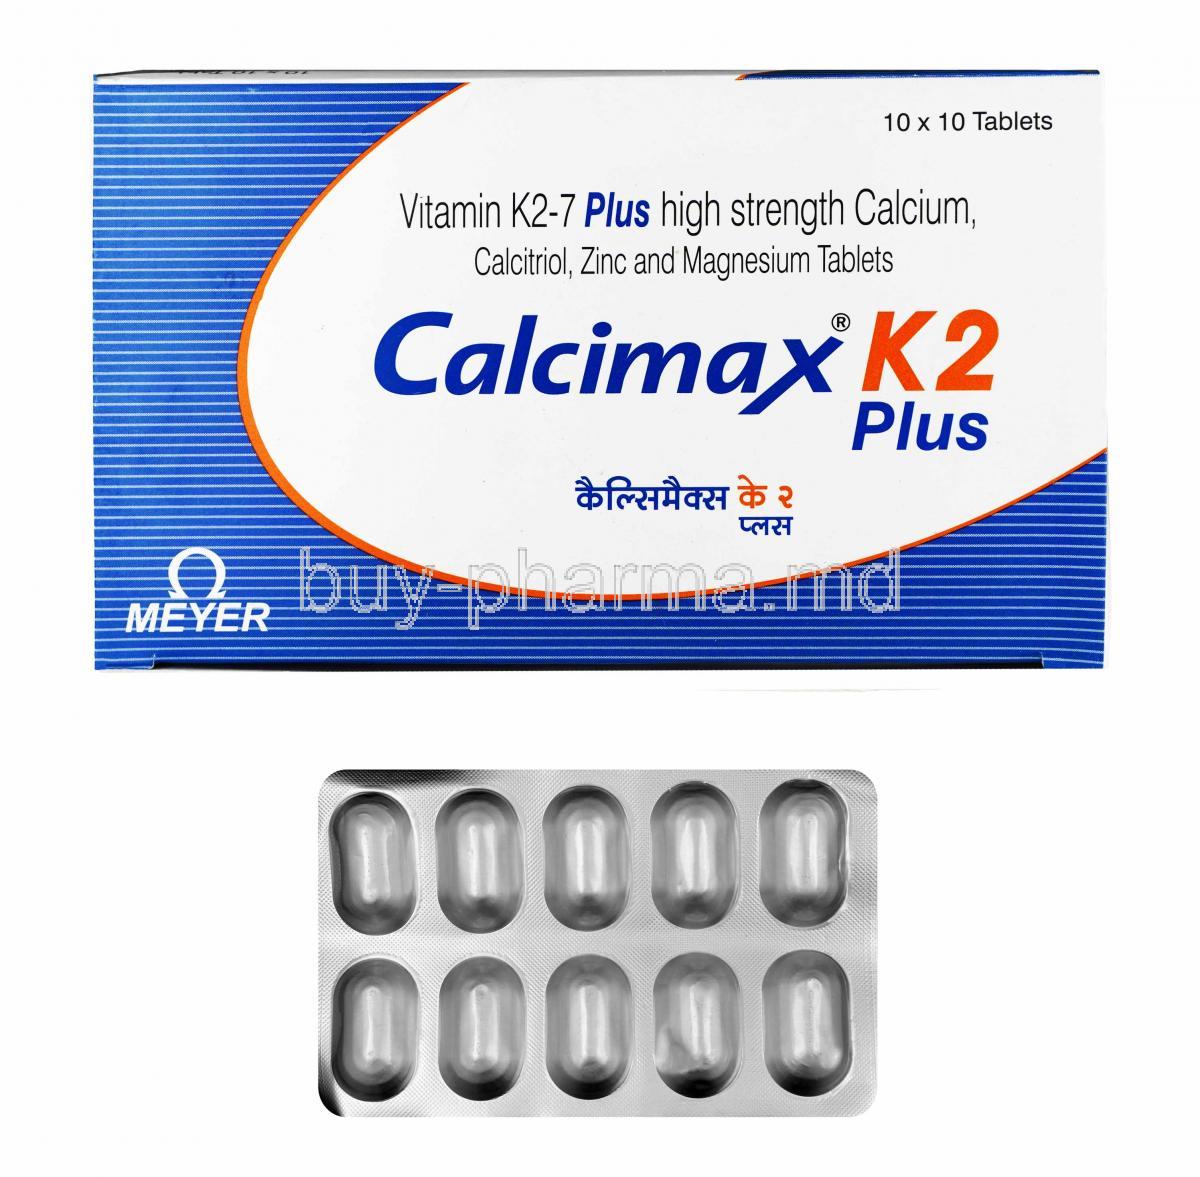 Calcimax K2 Plus box and tablets